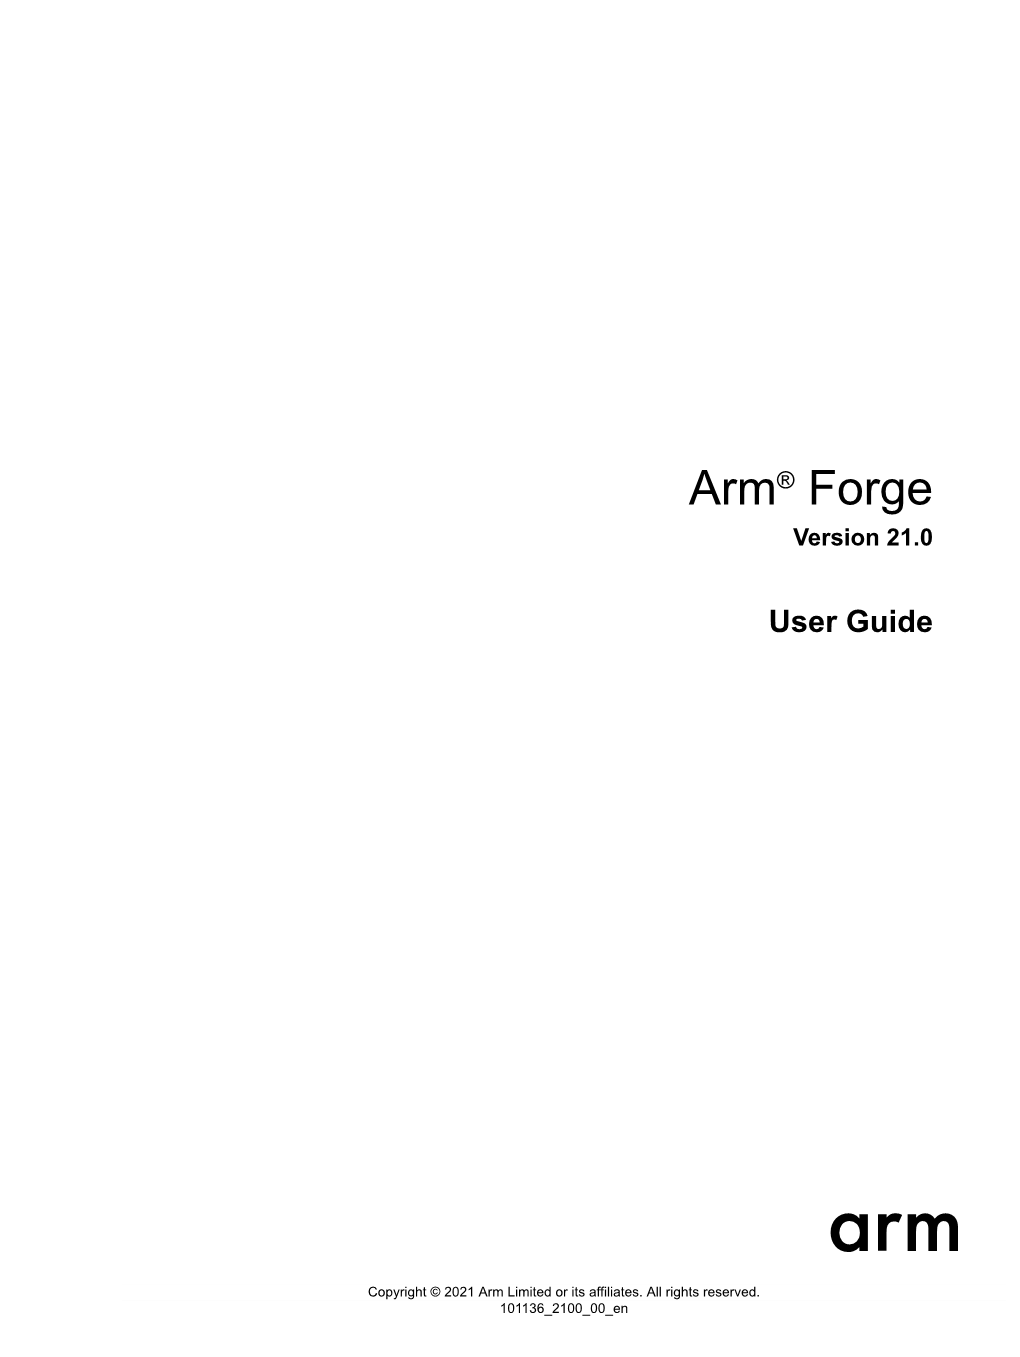 Arm® Forge User Guide Copyright © 2021 Arm Limited Or Its Affiliates